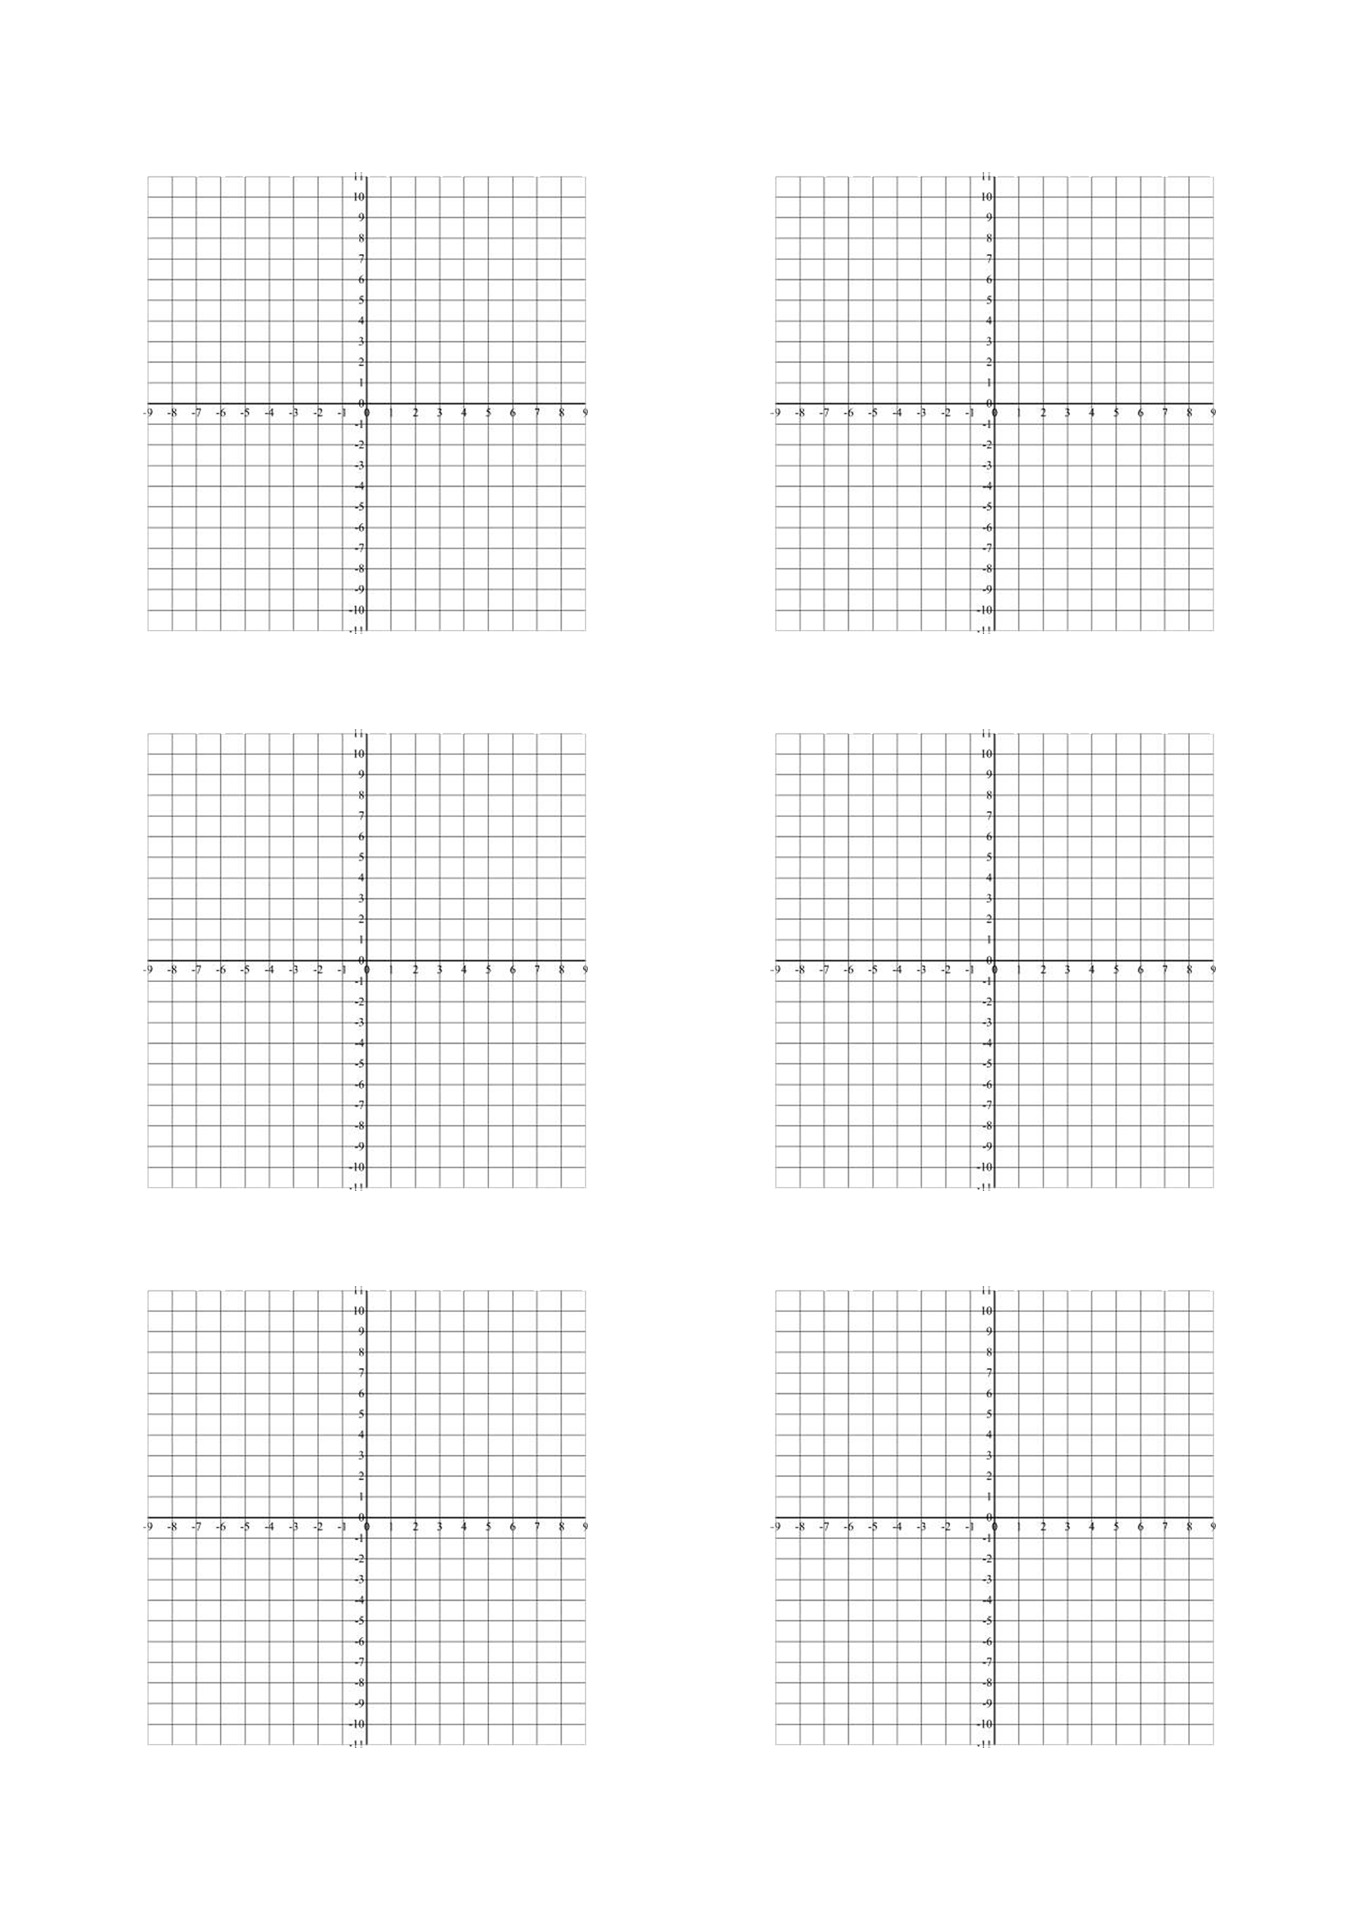 9 Best Images of Free Coordinate Grid Worksheets - Mickey Mouse ...